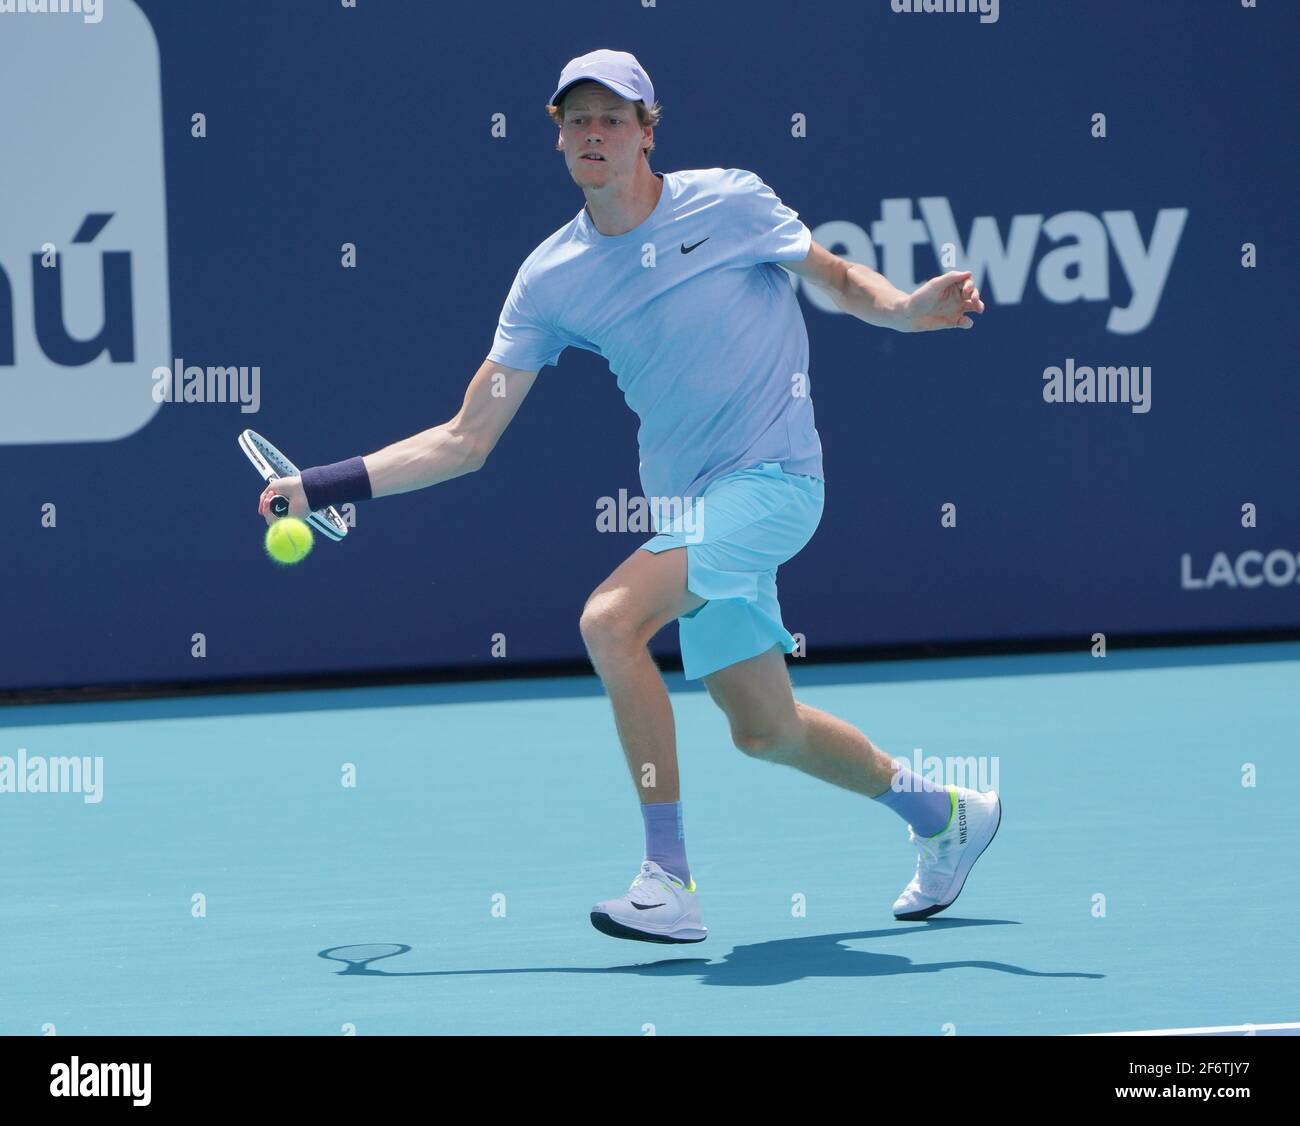 Miami, United States Of America. 02nd Apr, 2021. MIAMI GARDENS, FLORIDA - APRIL 02: Jannick Sinner of Italyreturns a shot to Roberto Bautista Agut of Spain in the semifinals during the Miami Open at Hard Rock Stadium on April 02, 2021 in Miami Gardens, Florida. (Photo by Alberto E. Tamargo/Sipa USA) Credit: Sipa USA/Alamy Live News Stock Photo